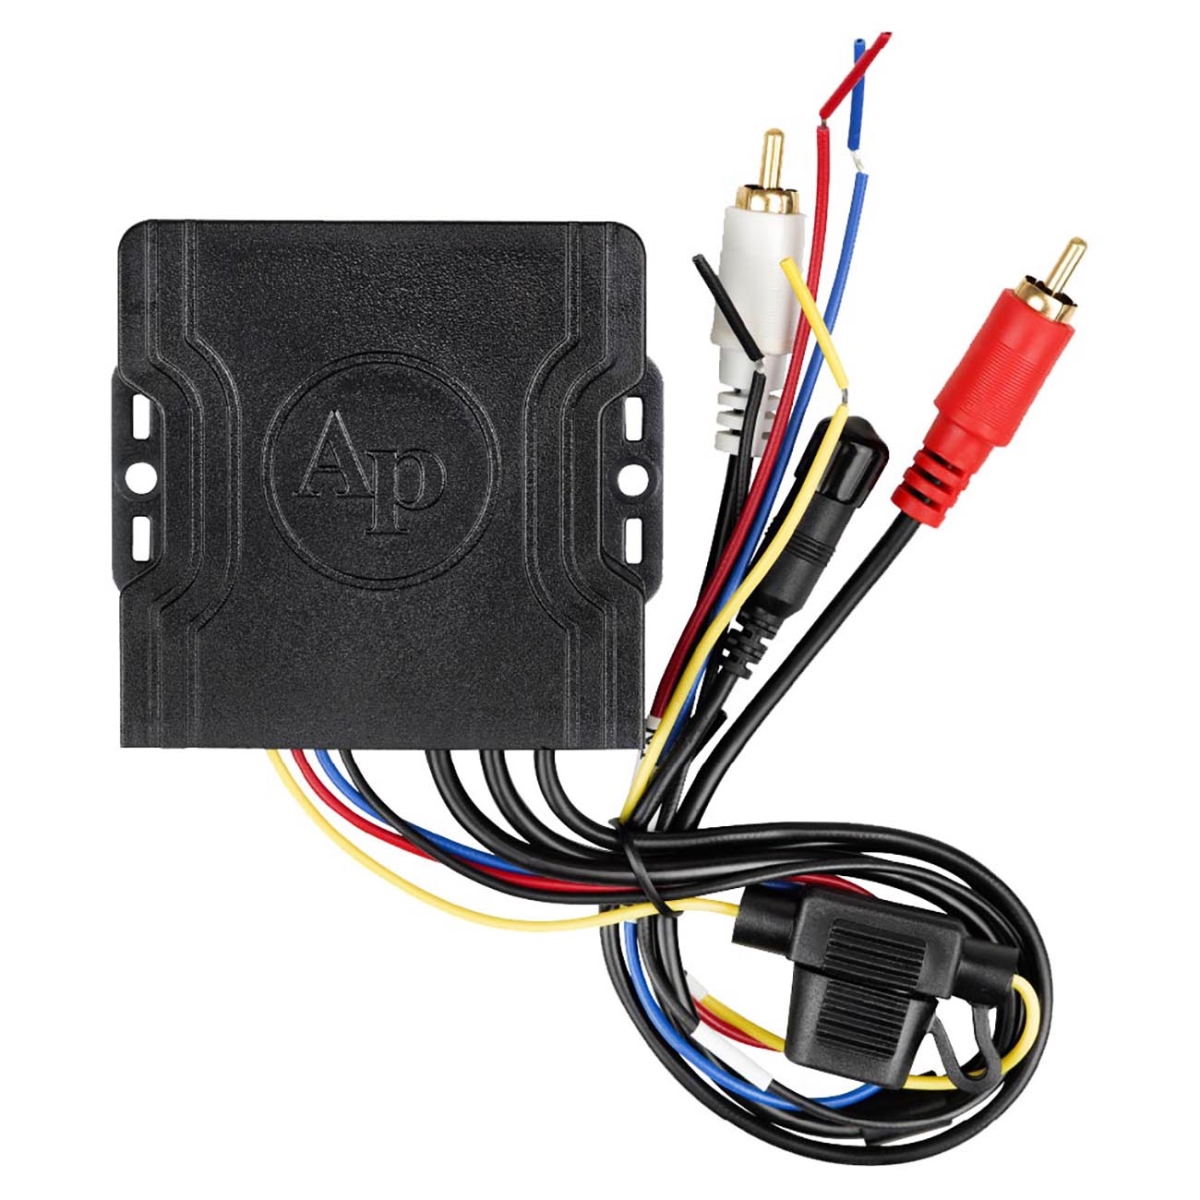 Picture of Audiopipe APBTM1750IP Wireless Music Streaming Audio Receiver - IPX7 Rated